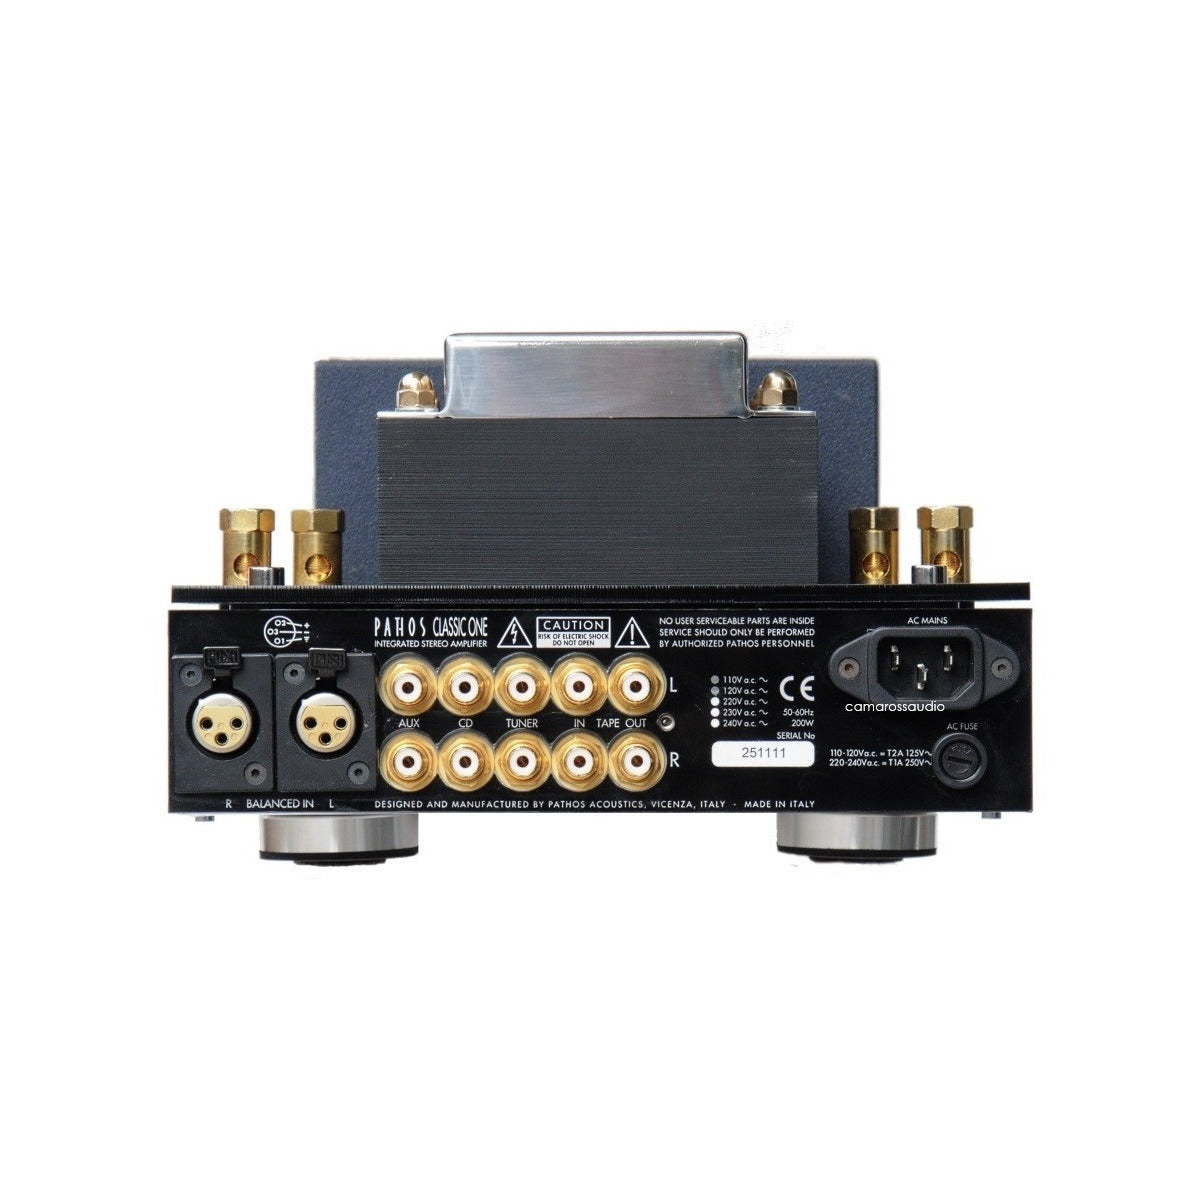 PATHOS CLASSIC ONE MK2 HYBRID INTEGRATED POWER AMPLIFIER